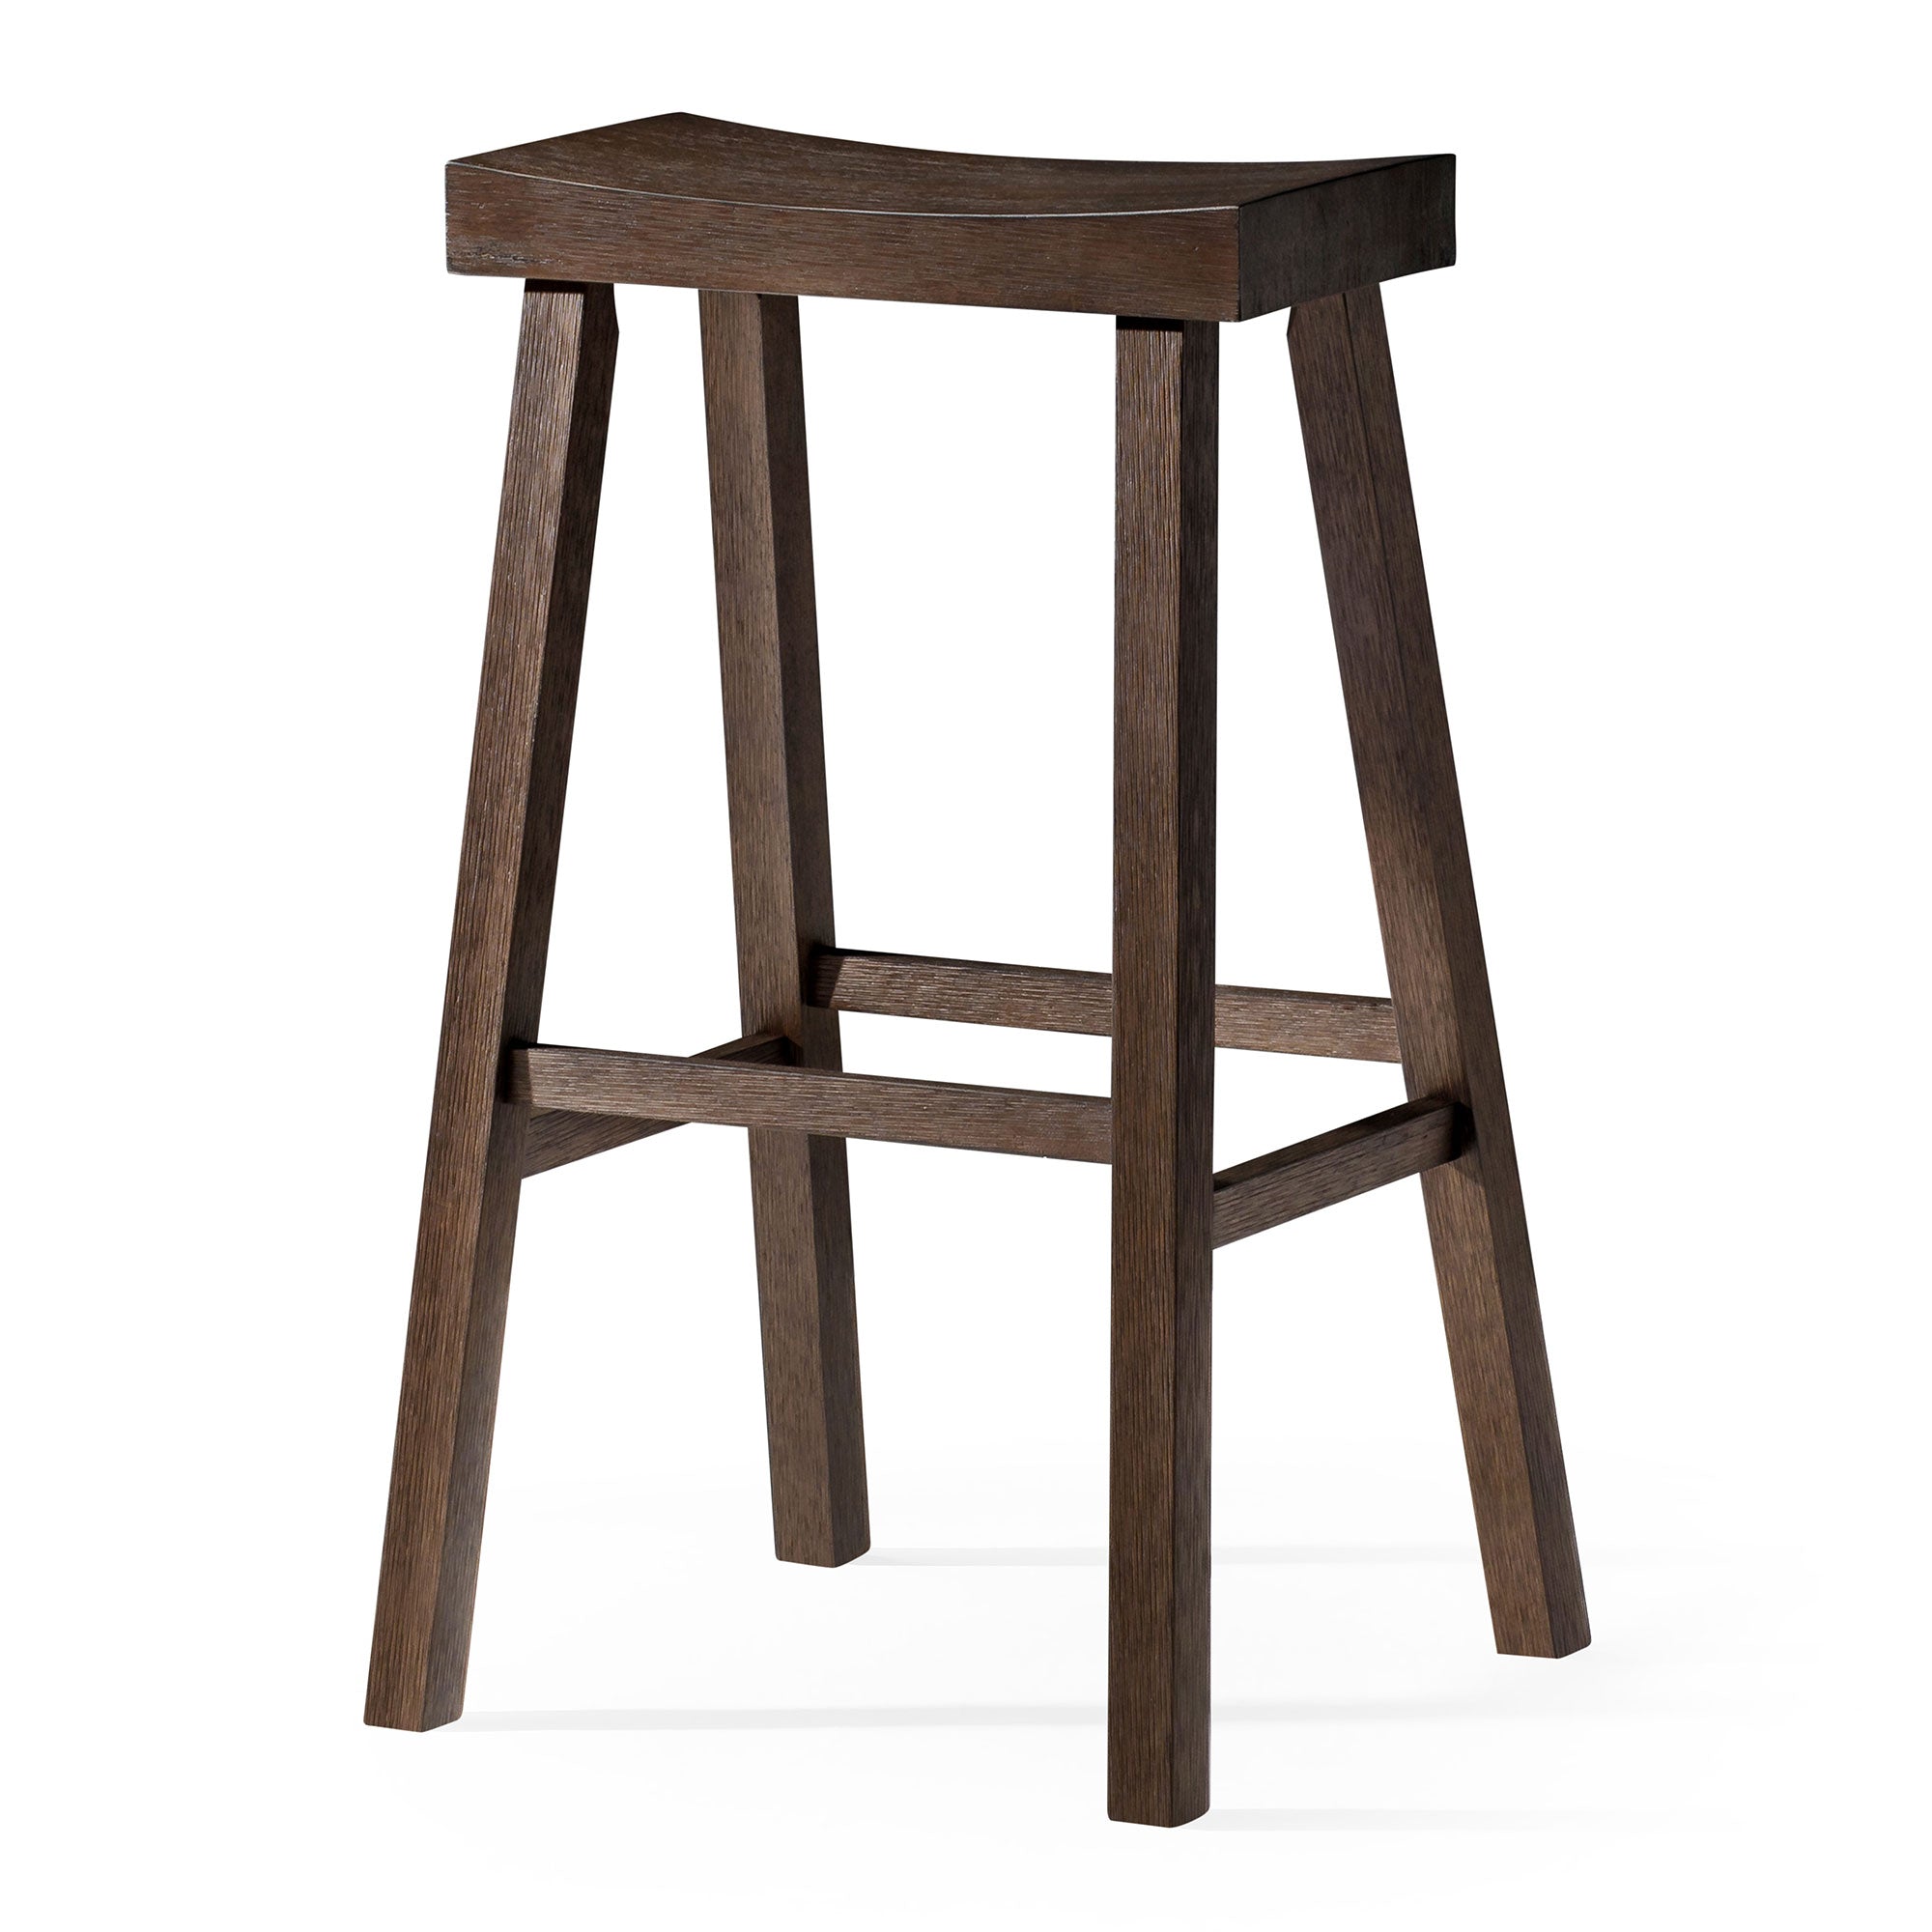 Vincent Bar Stool in Antiqued Brown Finish in Stools by Maven Lane